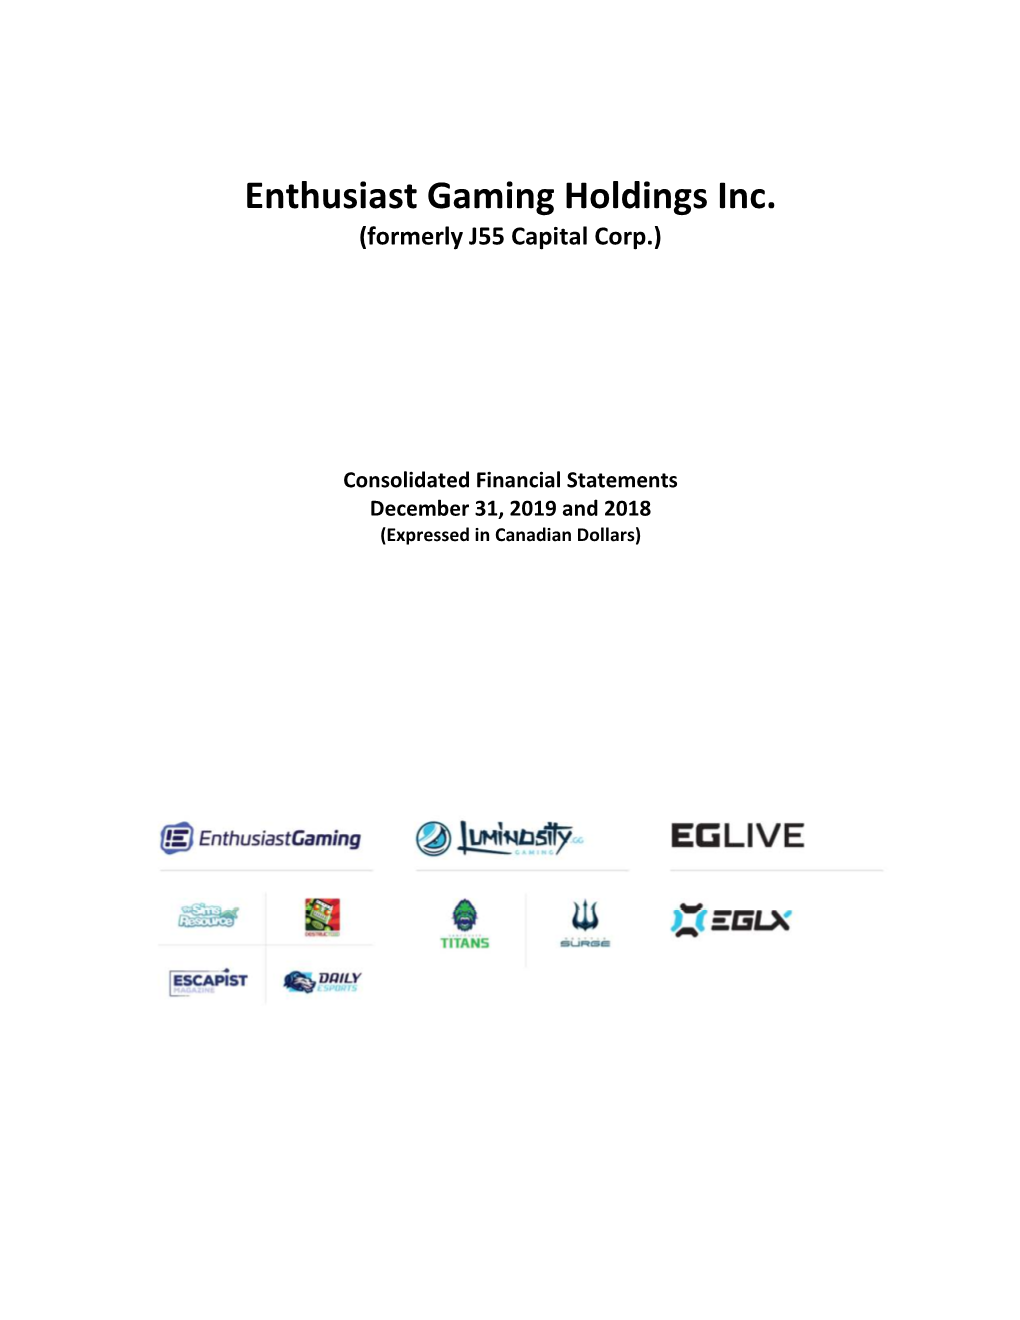 Enthusiast Gaming Holdings Inc. (Formerly J55 Capital Corp.)